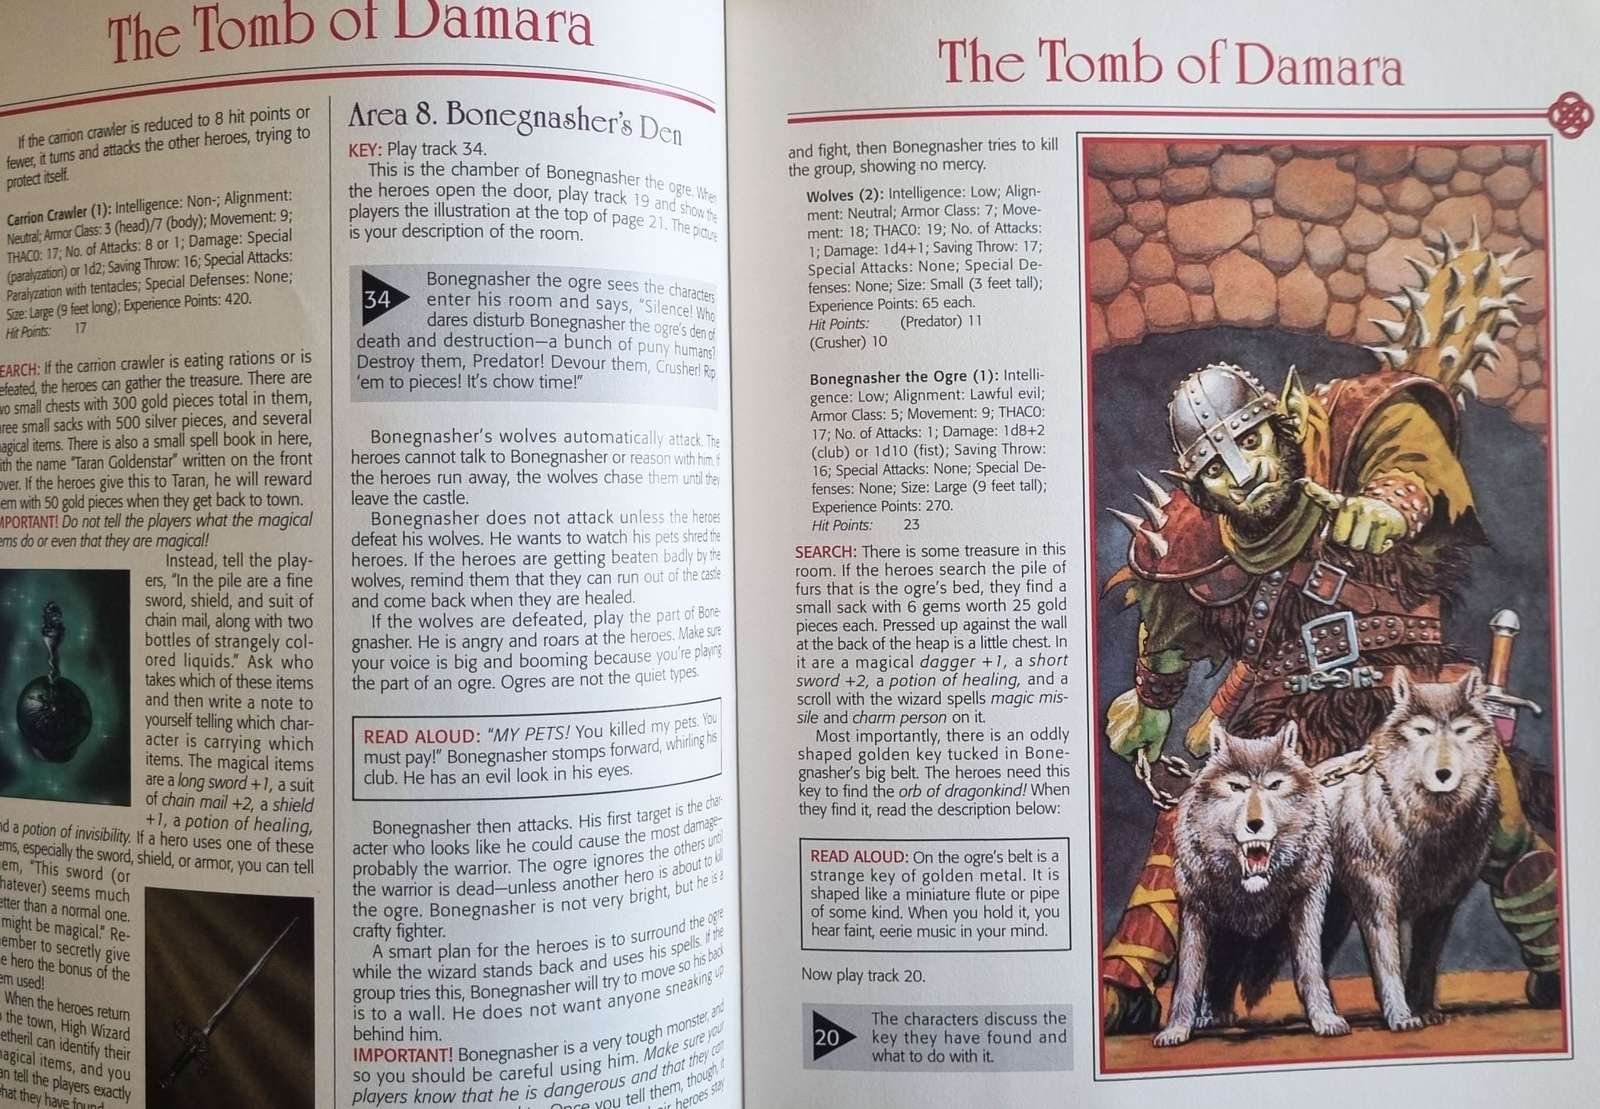 Introduction to Advanced Dungeons and Dragons: Dungeon Master Guide Default Title